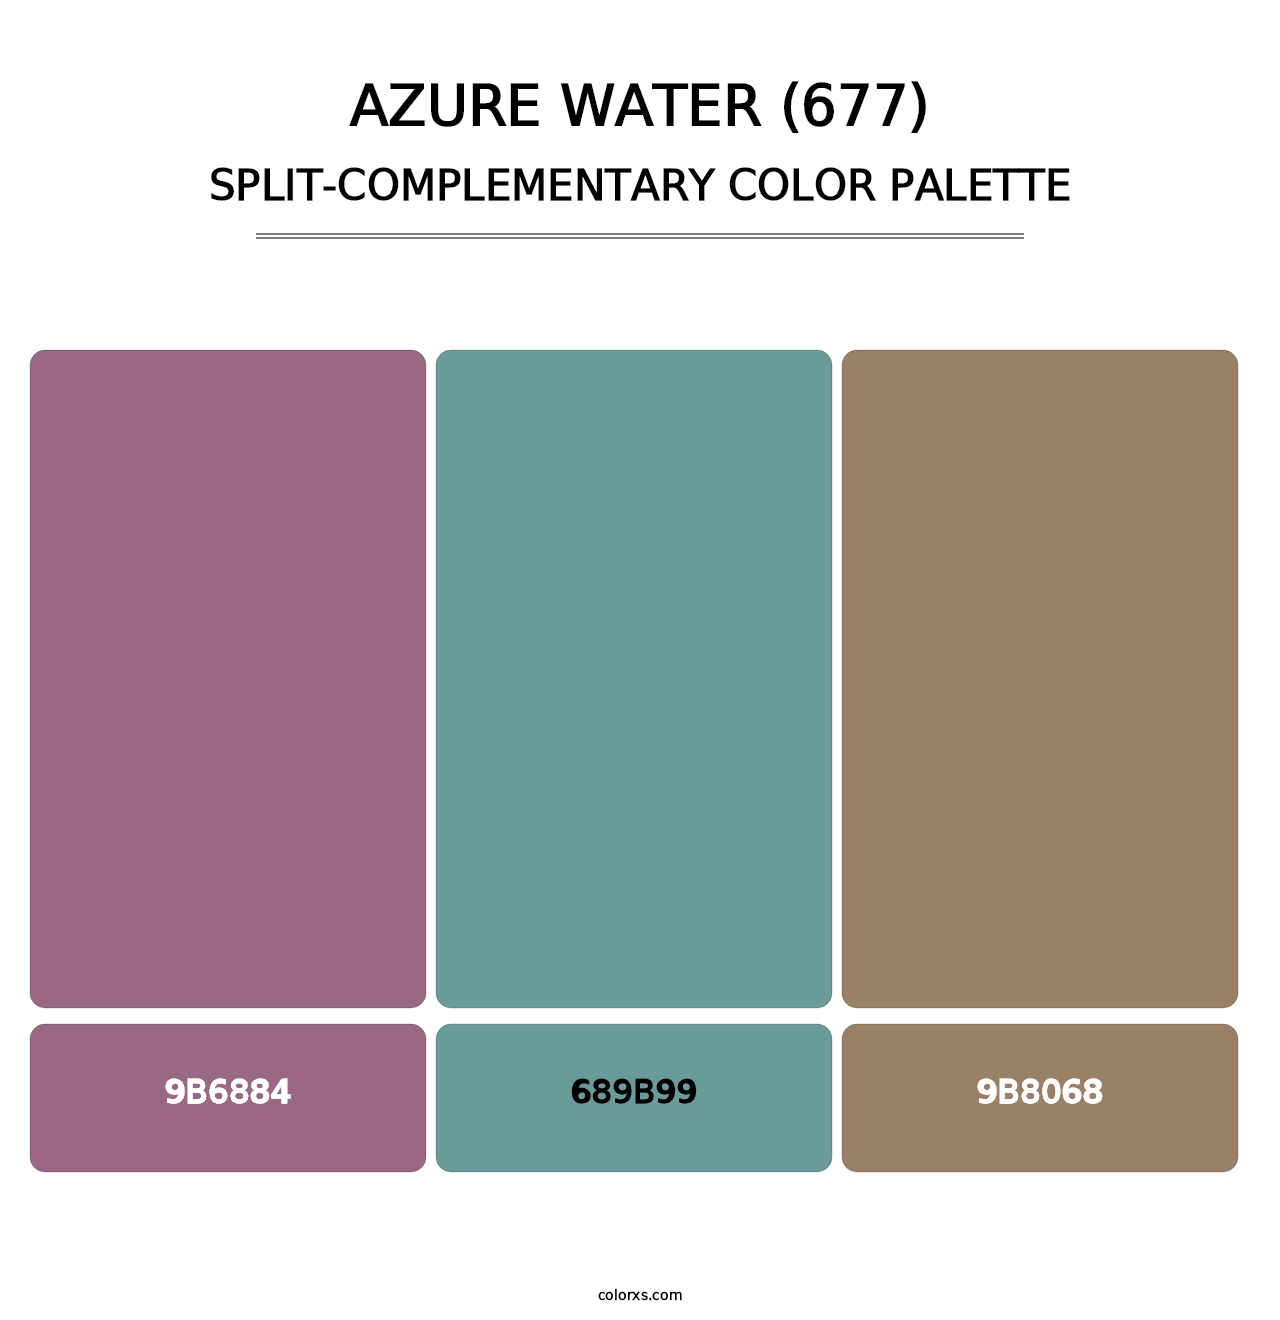 Azure Water (677) - Split-Complementary Color Palette